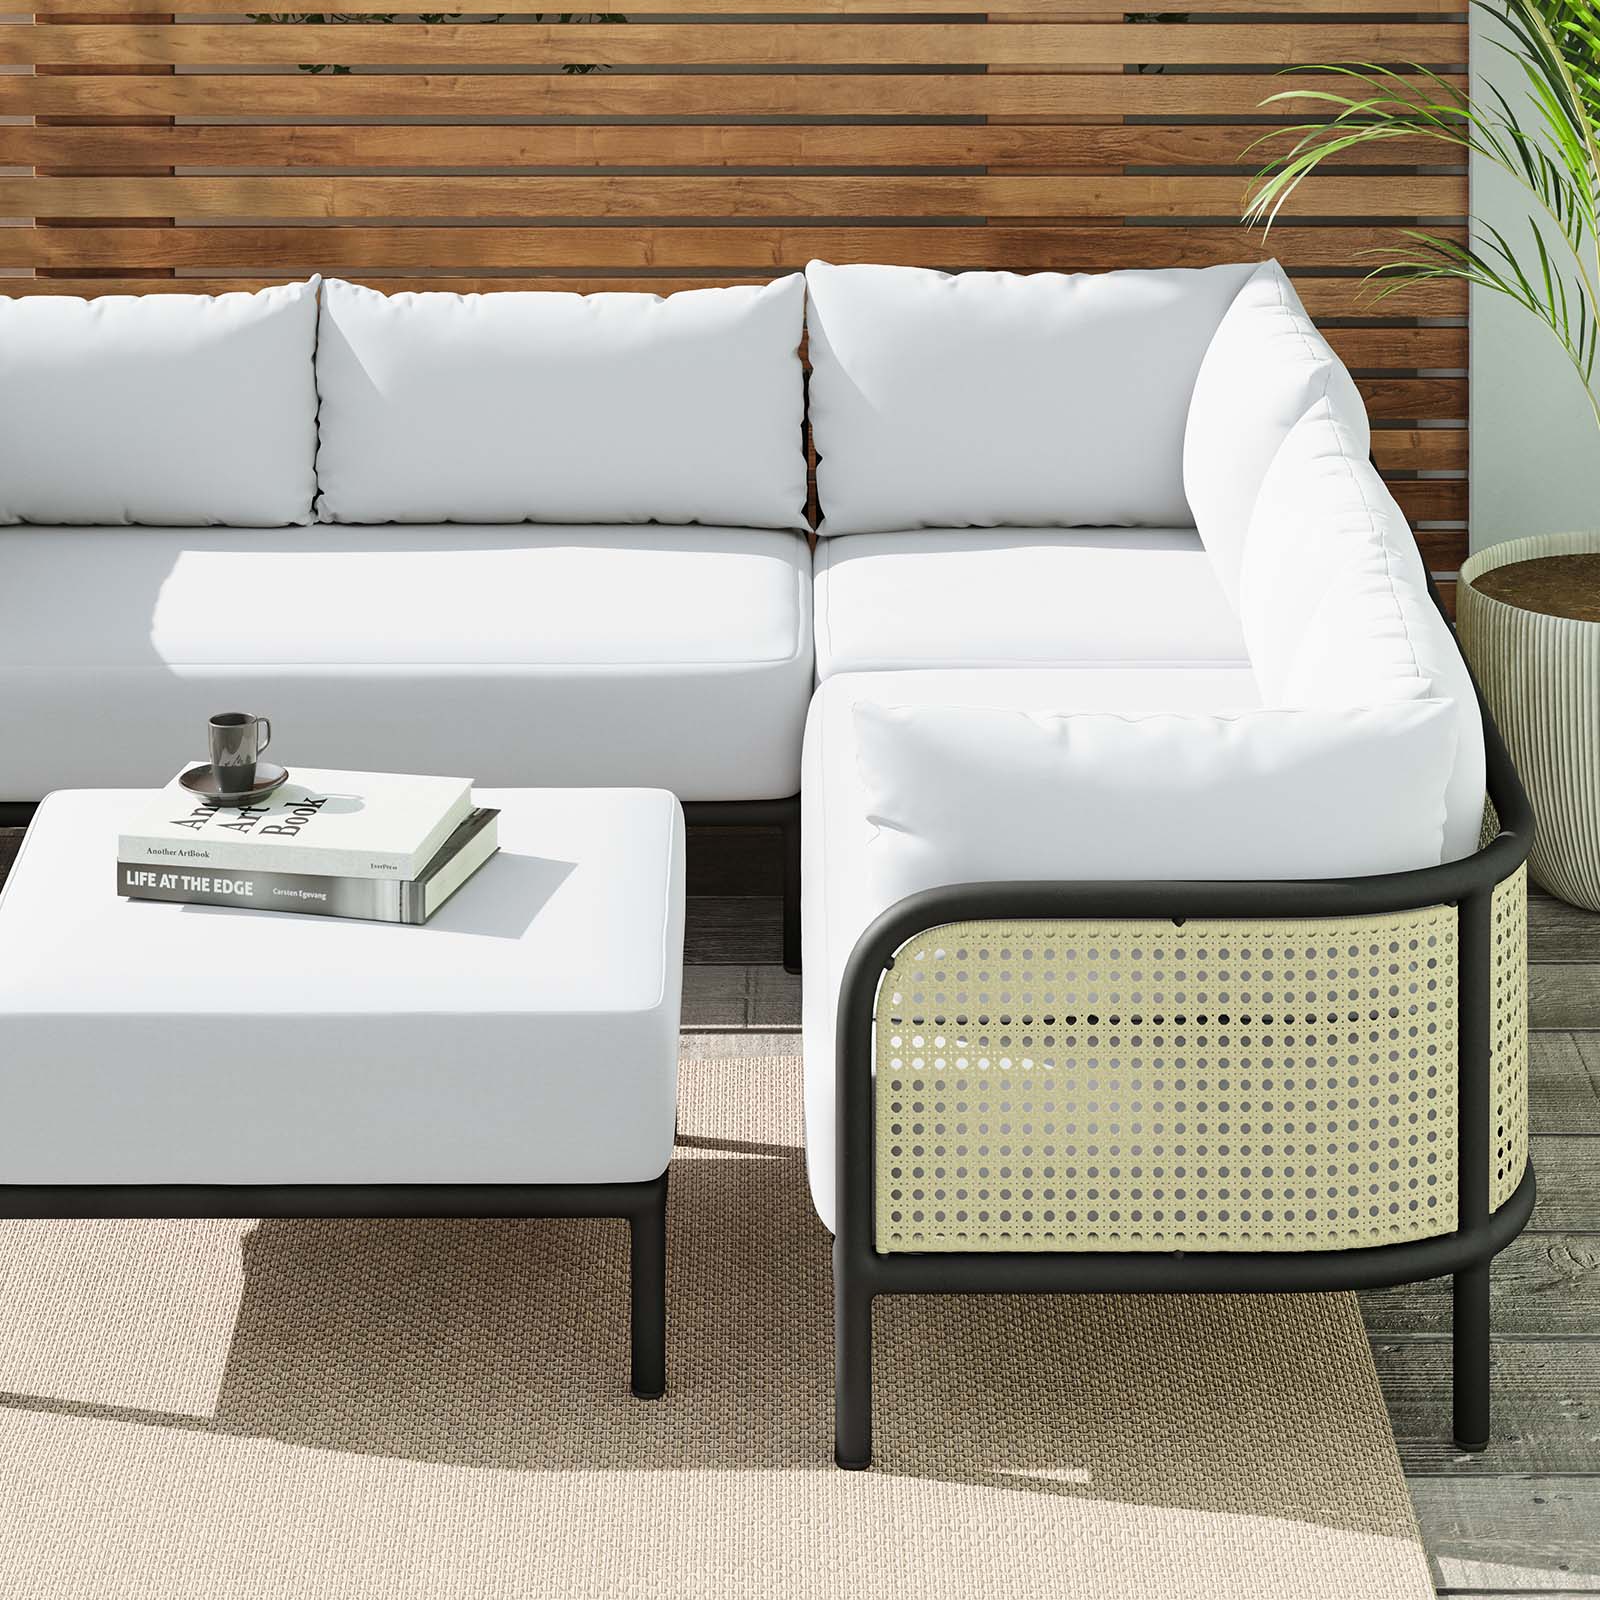 Modway Outdoor Sofas - Hanalei Outdoor Patio 4-Piece Sectional Ivory White